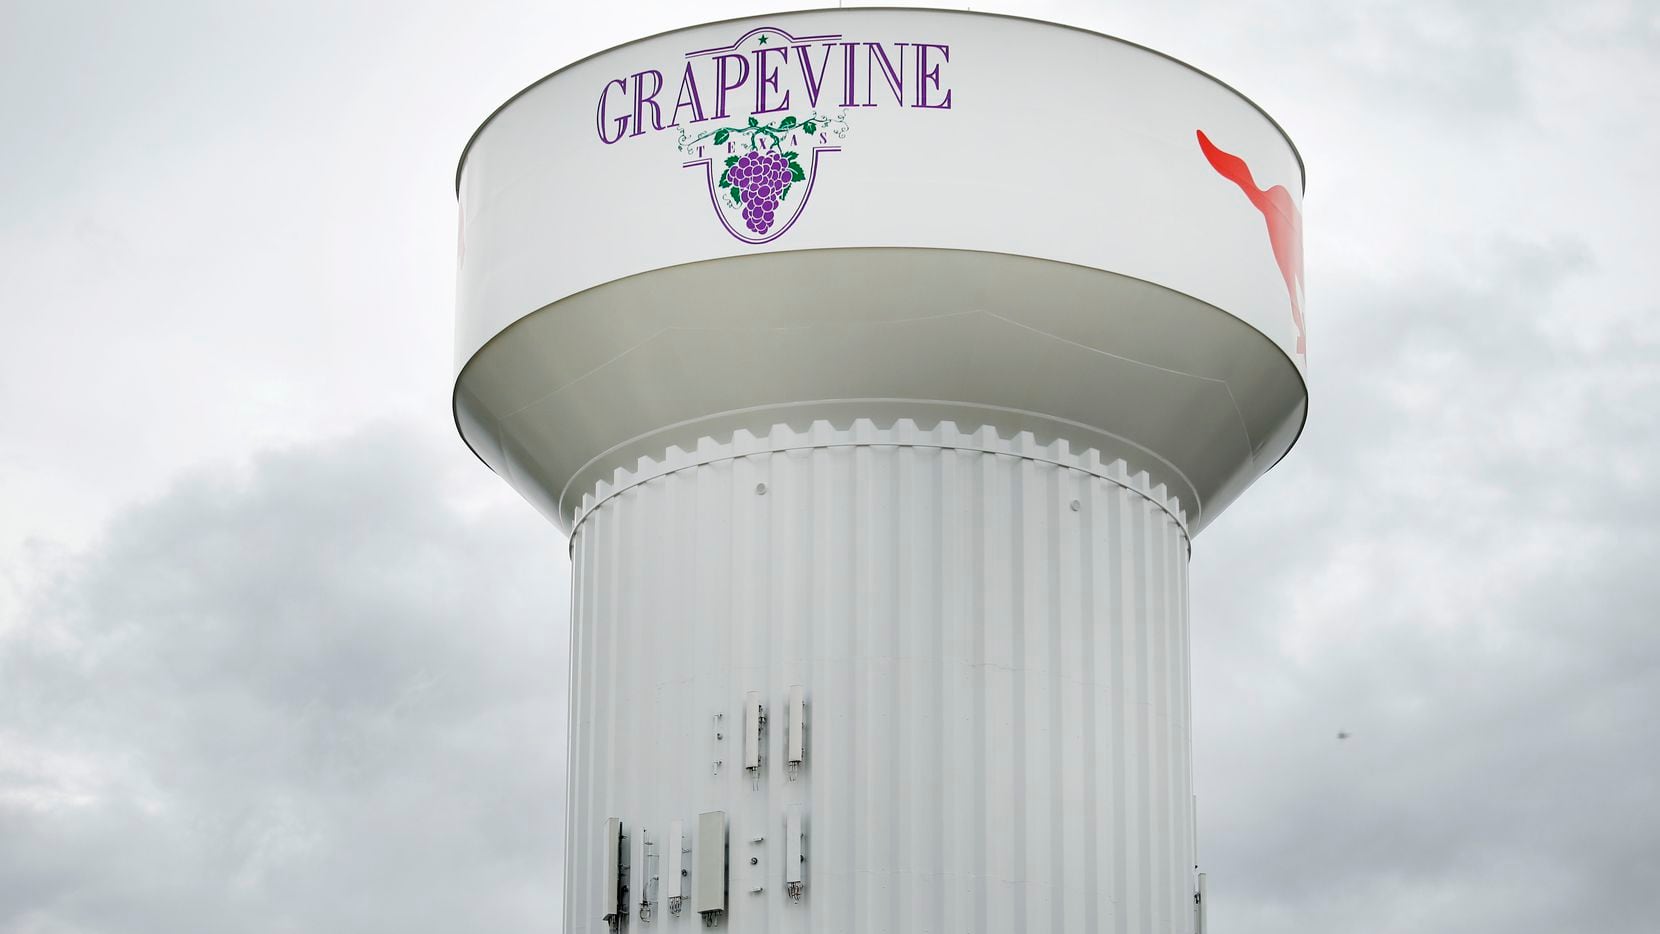 A Grapevine, Texas, water tower is pictured Tuesday, June 23, 2020. (Tom Fox/The Dallas...